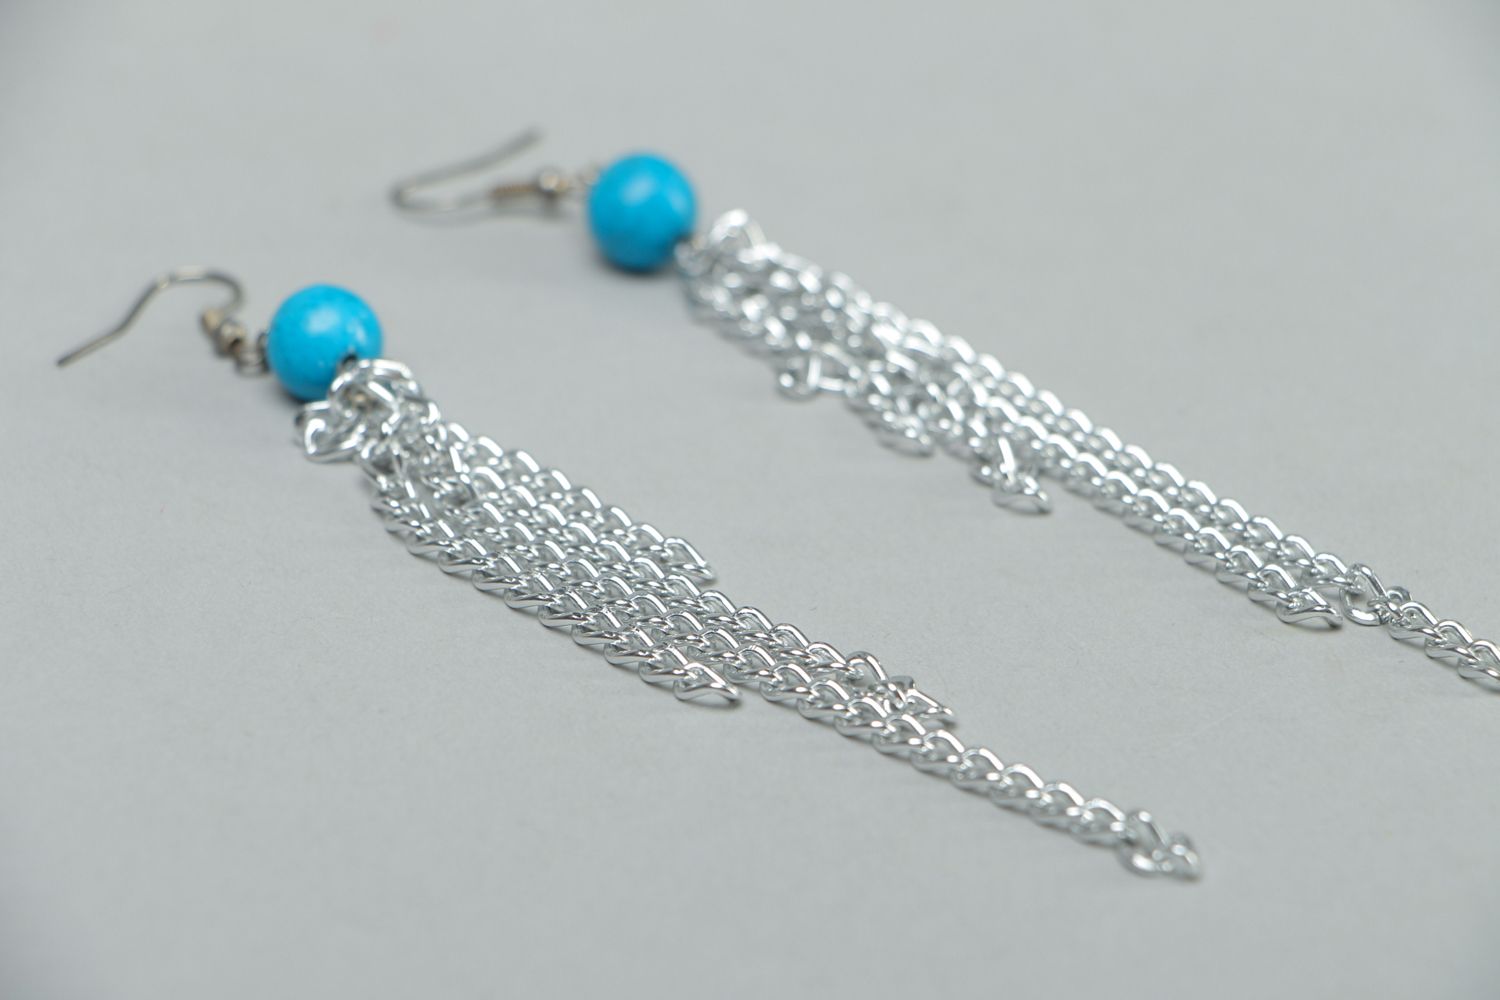 Metal earrings with chains and beads photo 2